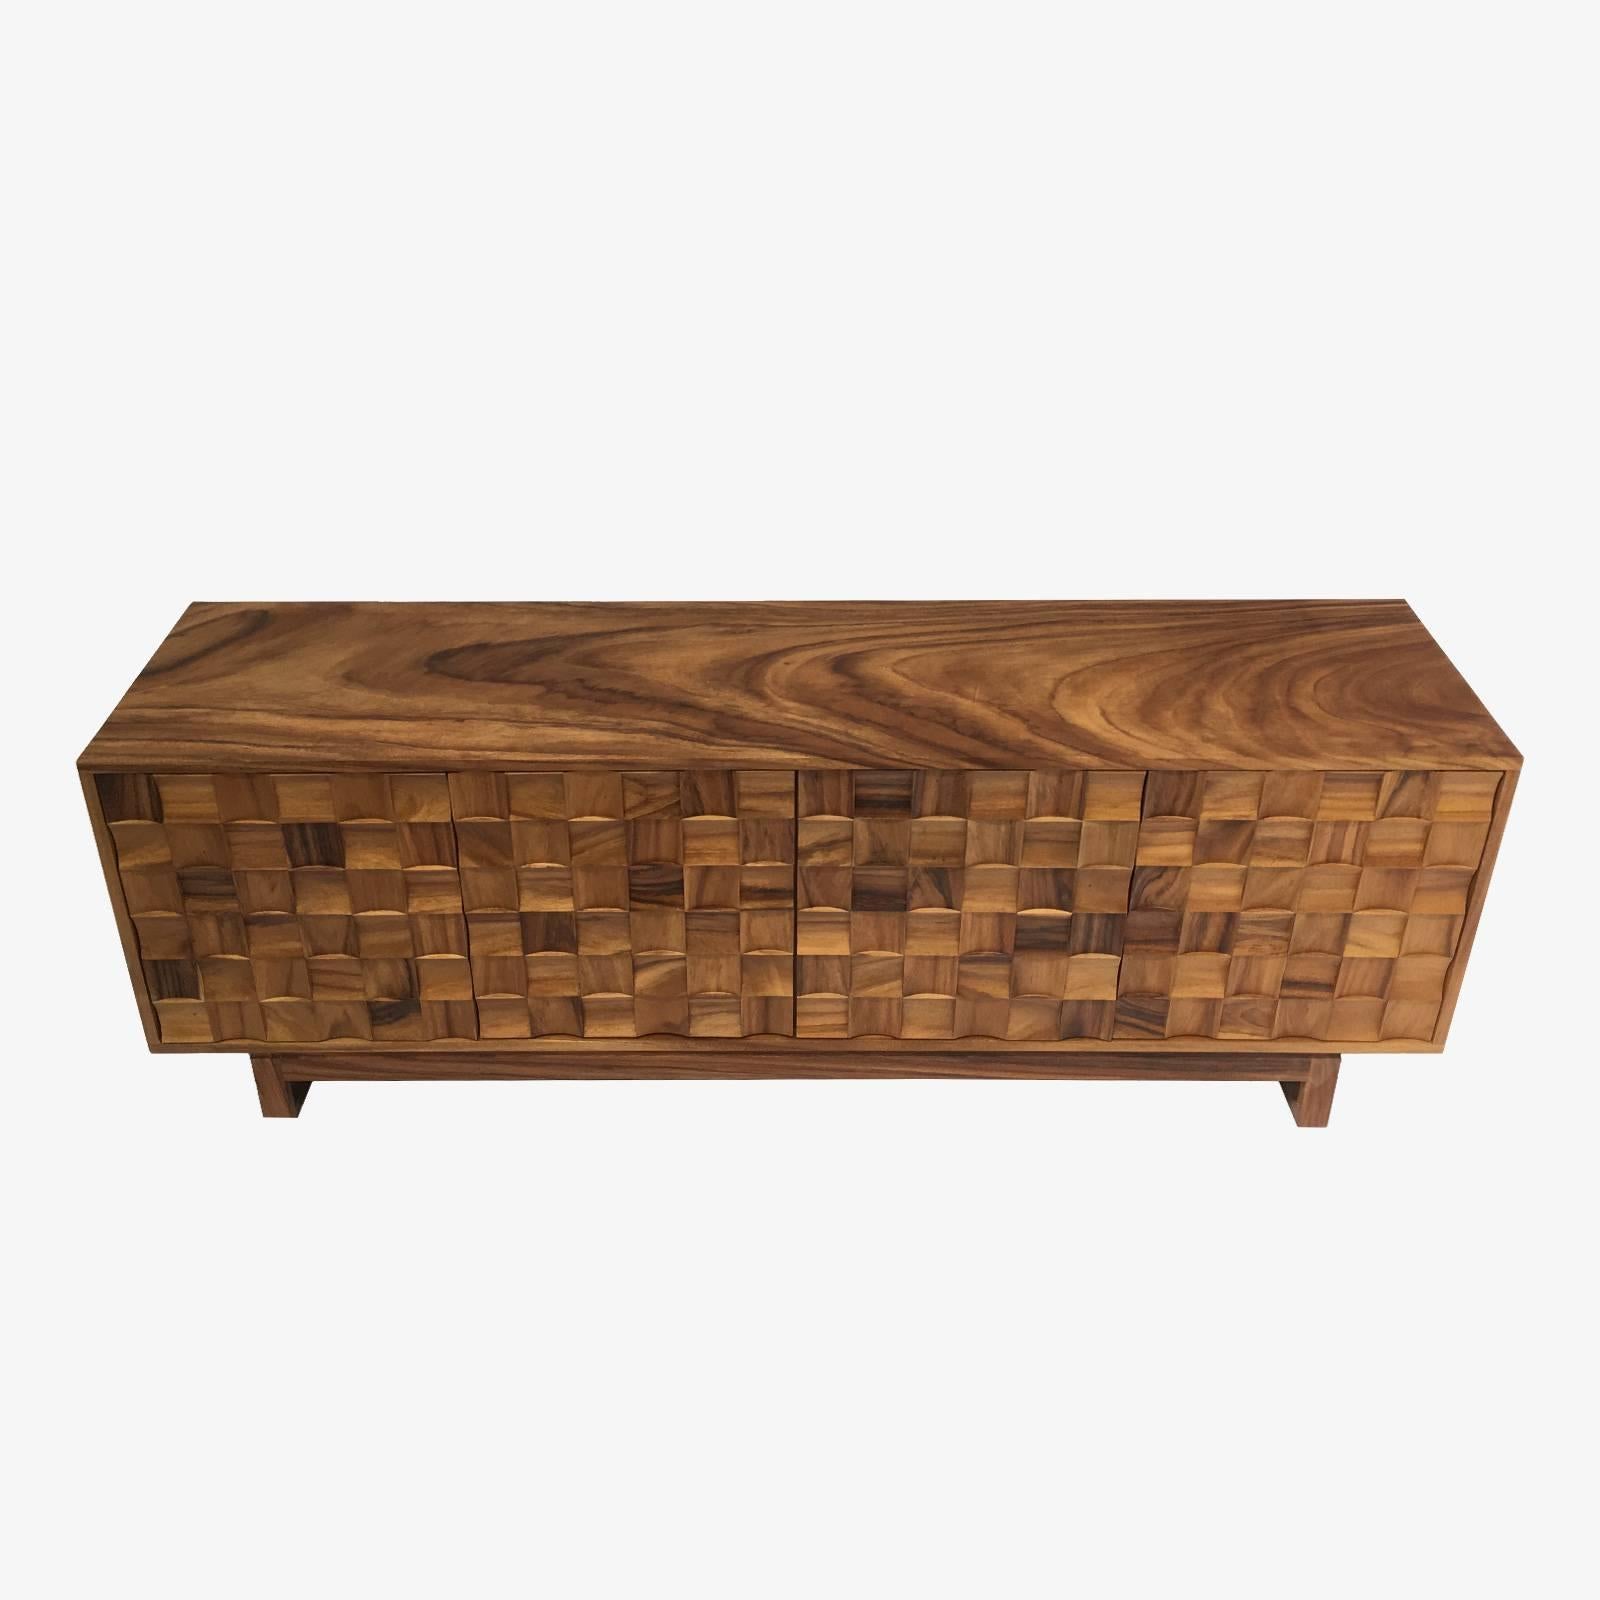 This credenza is designed and hand built in San Jose, Costa Rica. Dimay Valenzuela and Esteban Cardona are the husband and wife team behind A & O, a twenty year old custom wood working studio. This credenza is made from solid guanacaste, which is a